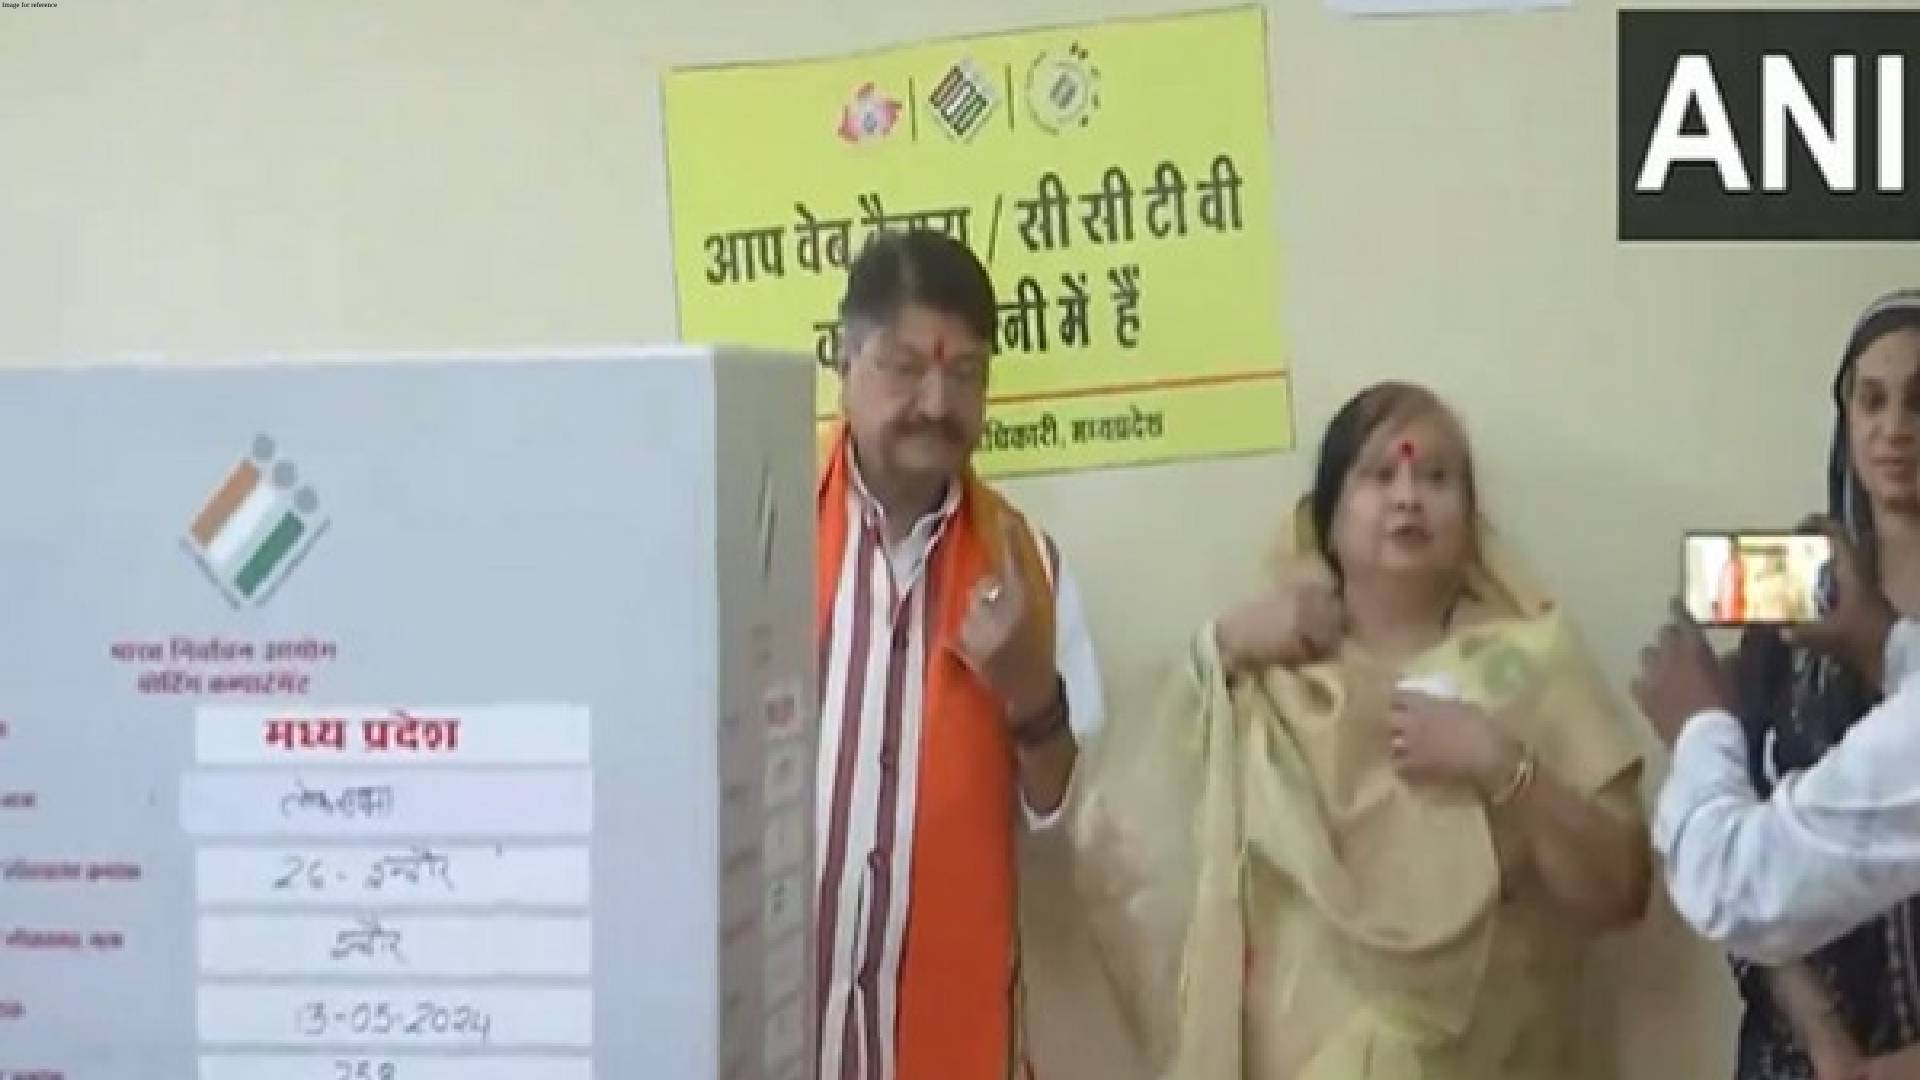 MP Minister Kailash Vijayvargiya casts vote with family in Indore